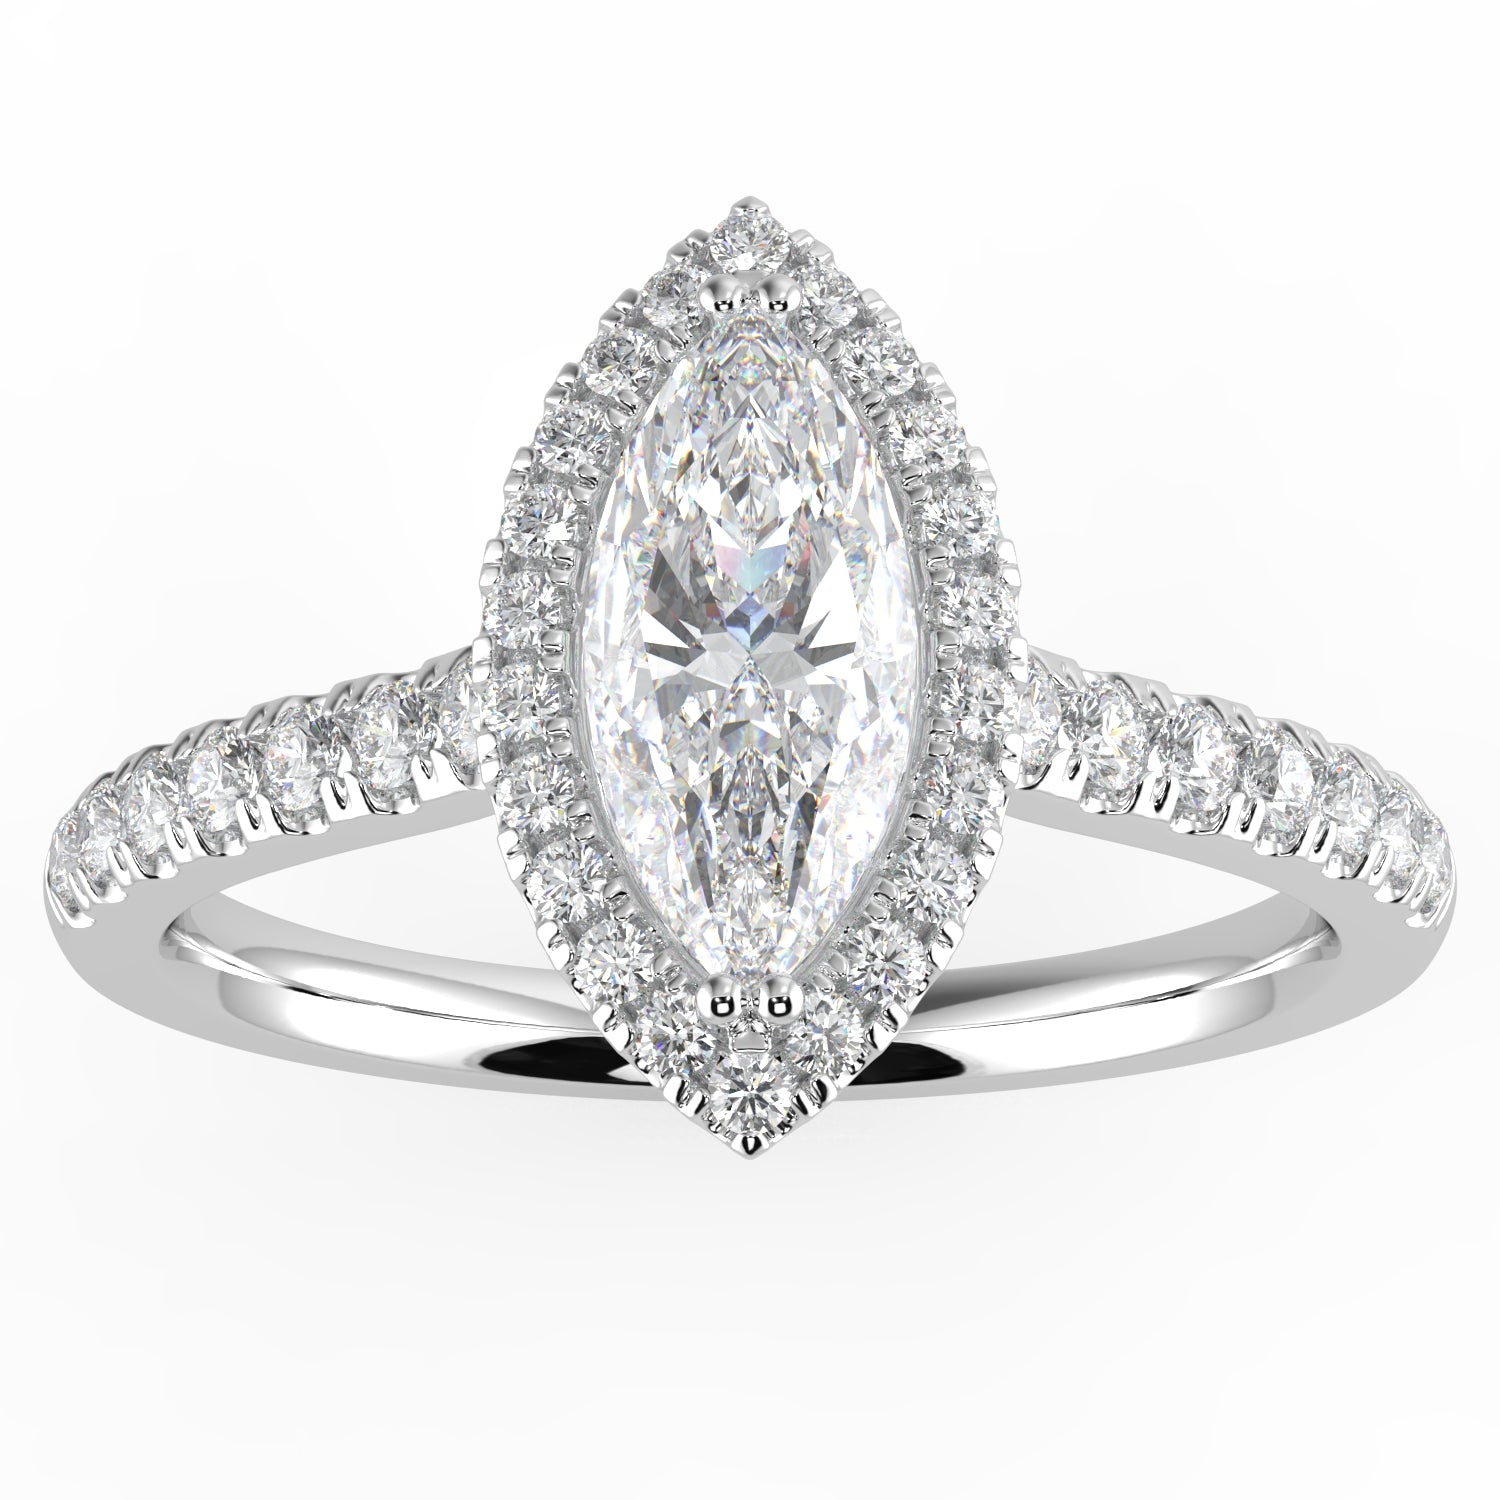 1.00ctw Natural Diamond Slim Shank 14K Bridal / Engagement Ring, GH SI 0.70cts Marquise Shape Diamond Center & 0.30 cts Round Side Stones